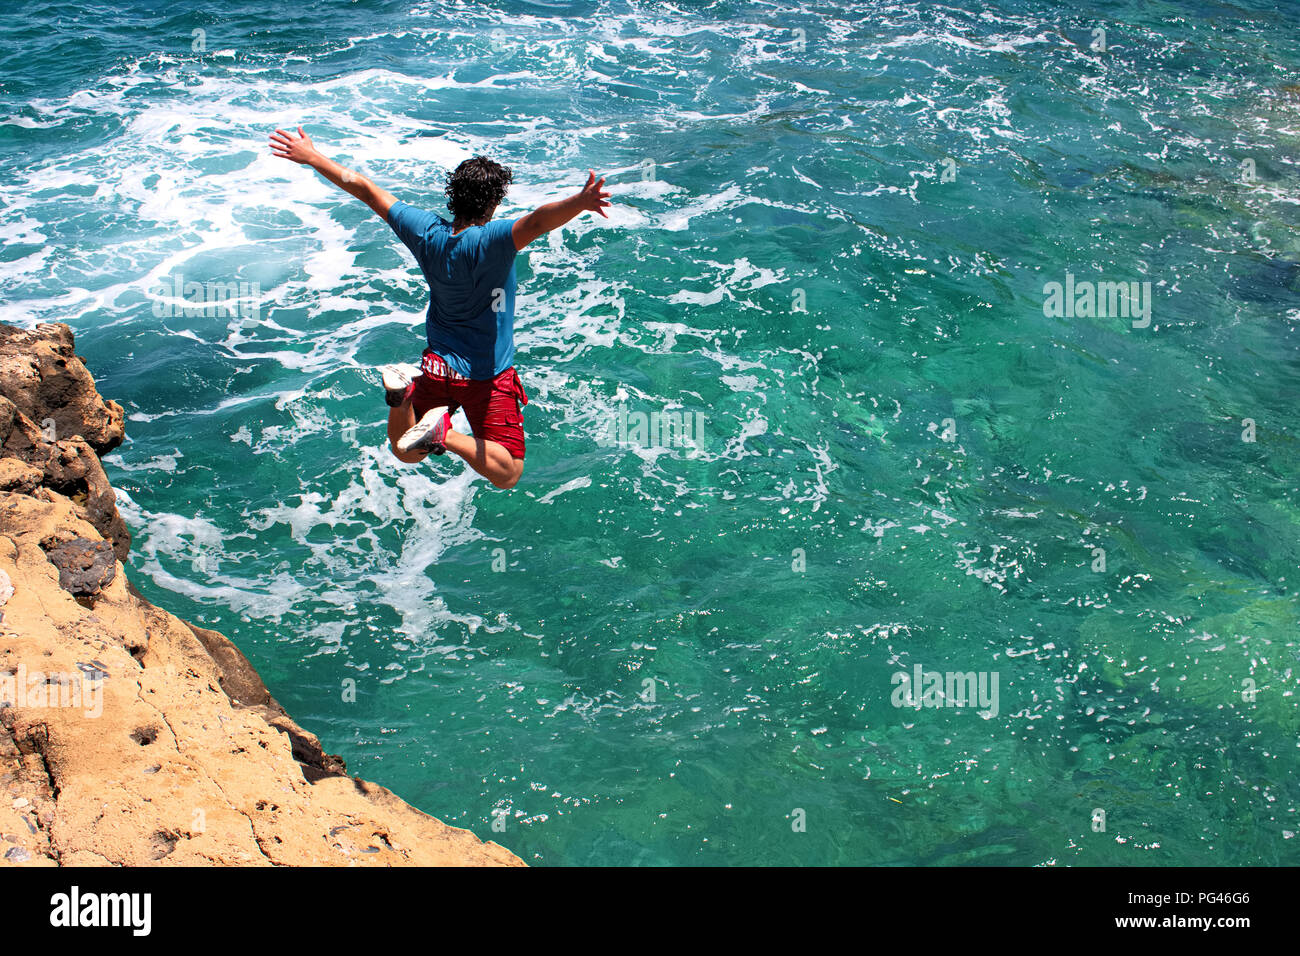 Making the leap cliff jumping in Greece Freedom Stock Photo